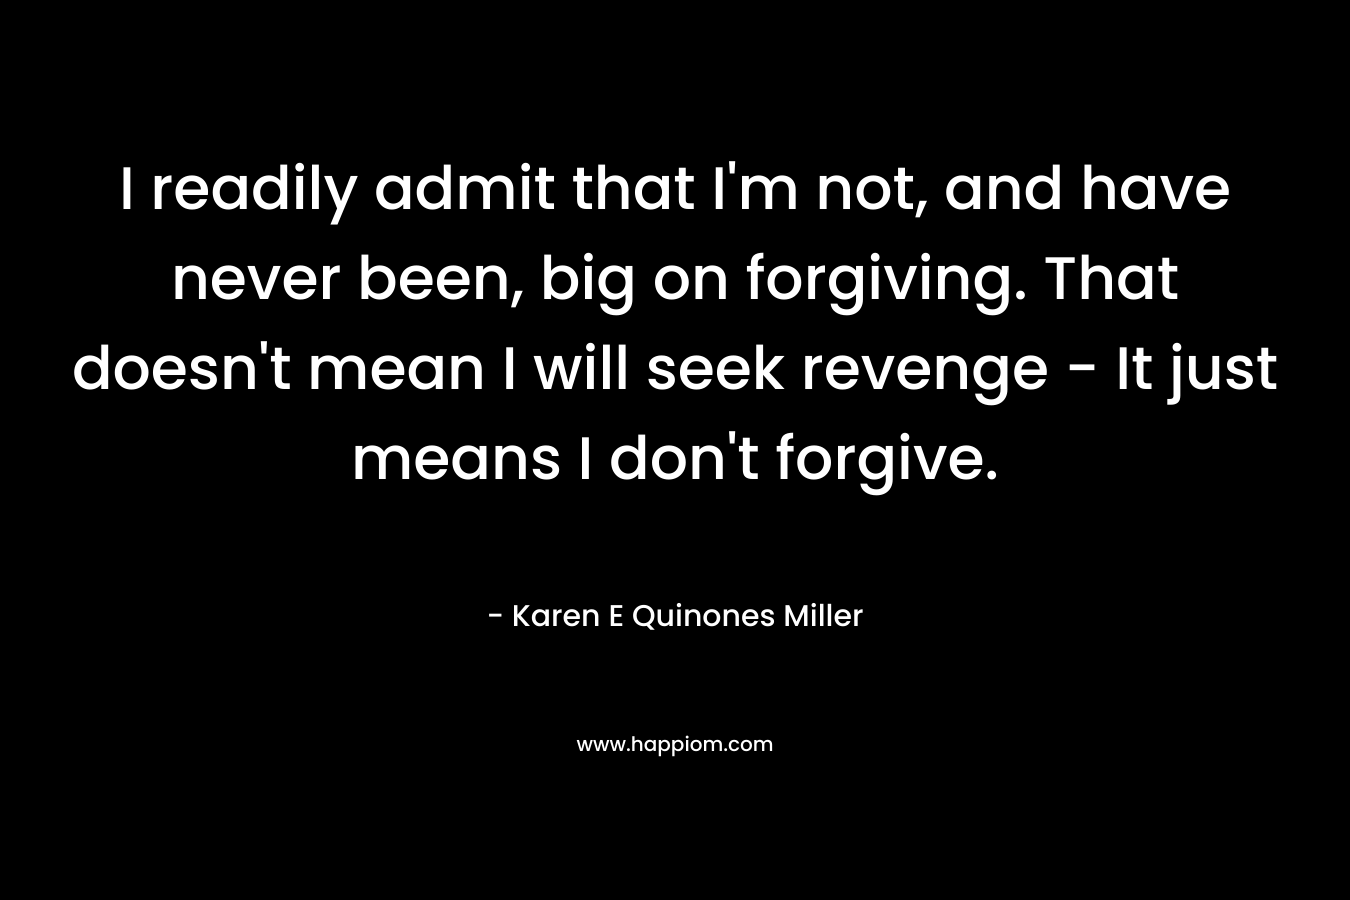 I readily admit that I'm not, and have never been, big on forgiving. That doesn't mean I will seek revenge - It just means I don't forgive.